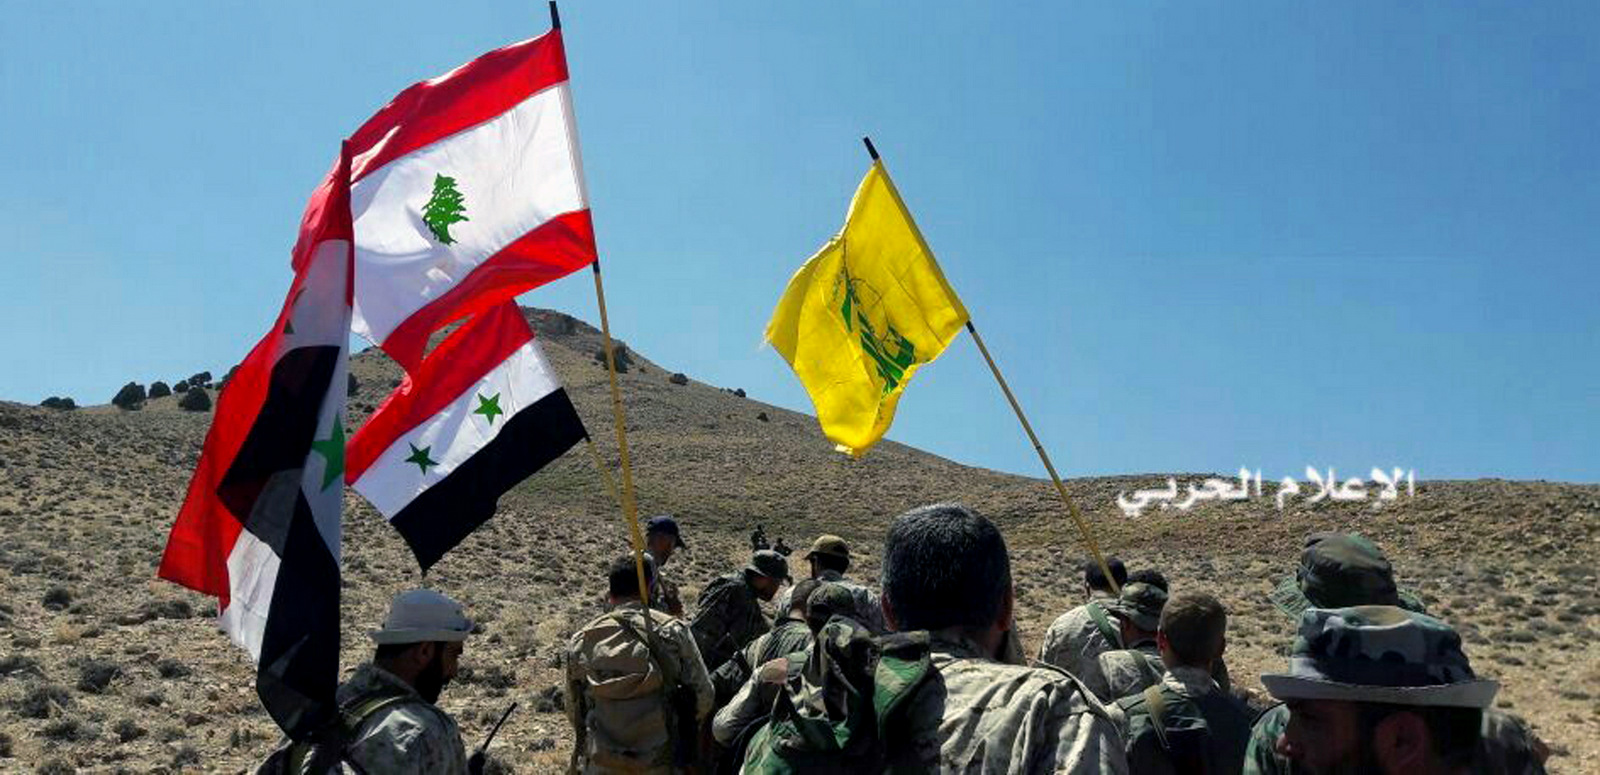 Hezbollah fighters advancing up a hill as they hold Lebanese, Syrian and their group's flags in the mountainous region of Qalamoun, Syria, Aug 28, 2017. (Syrian Central Military Media, via AP)